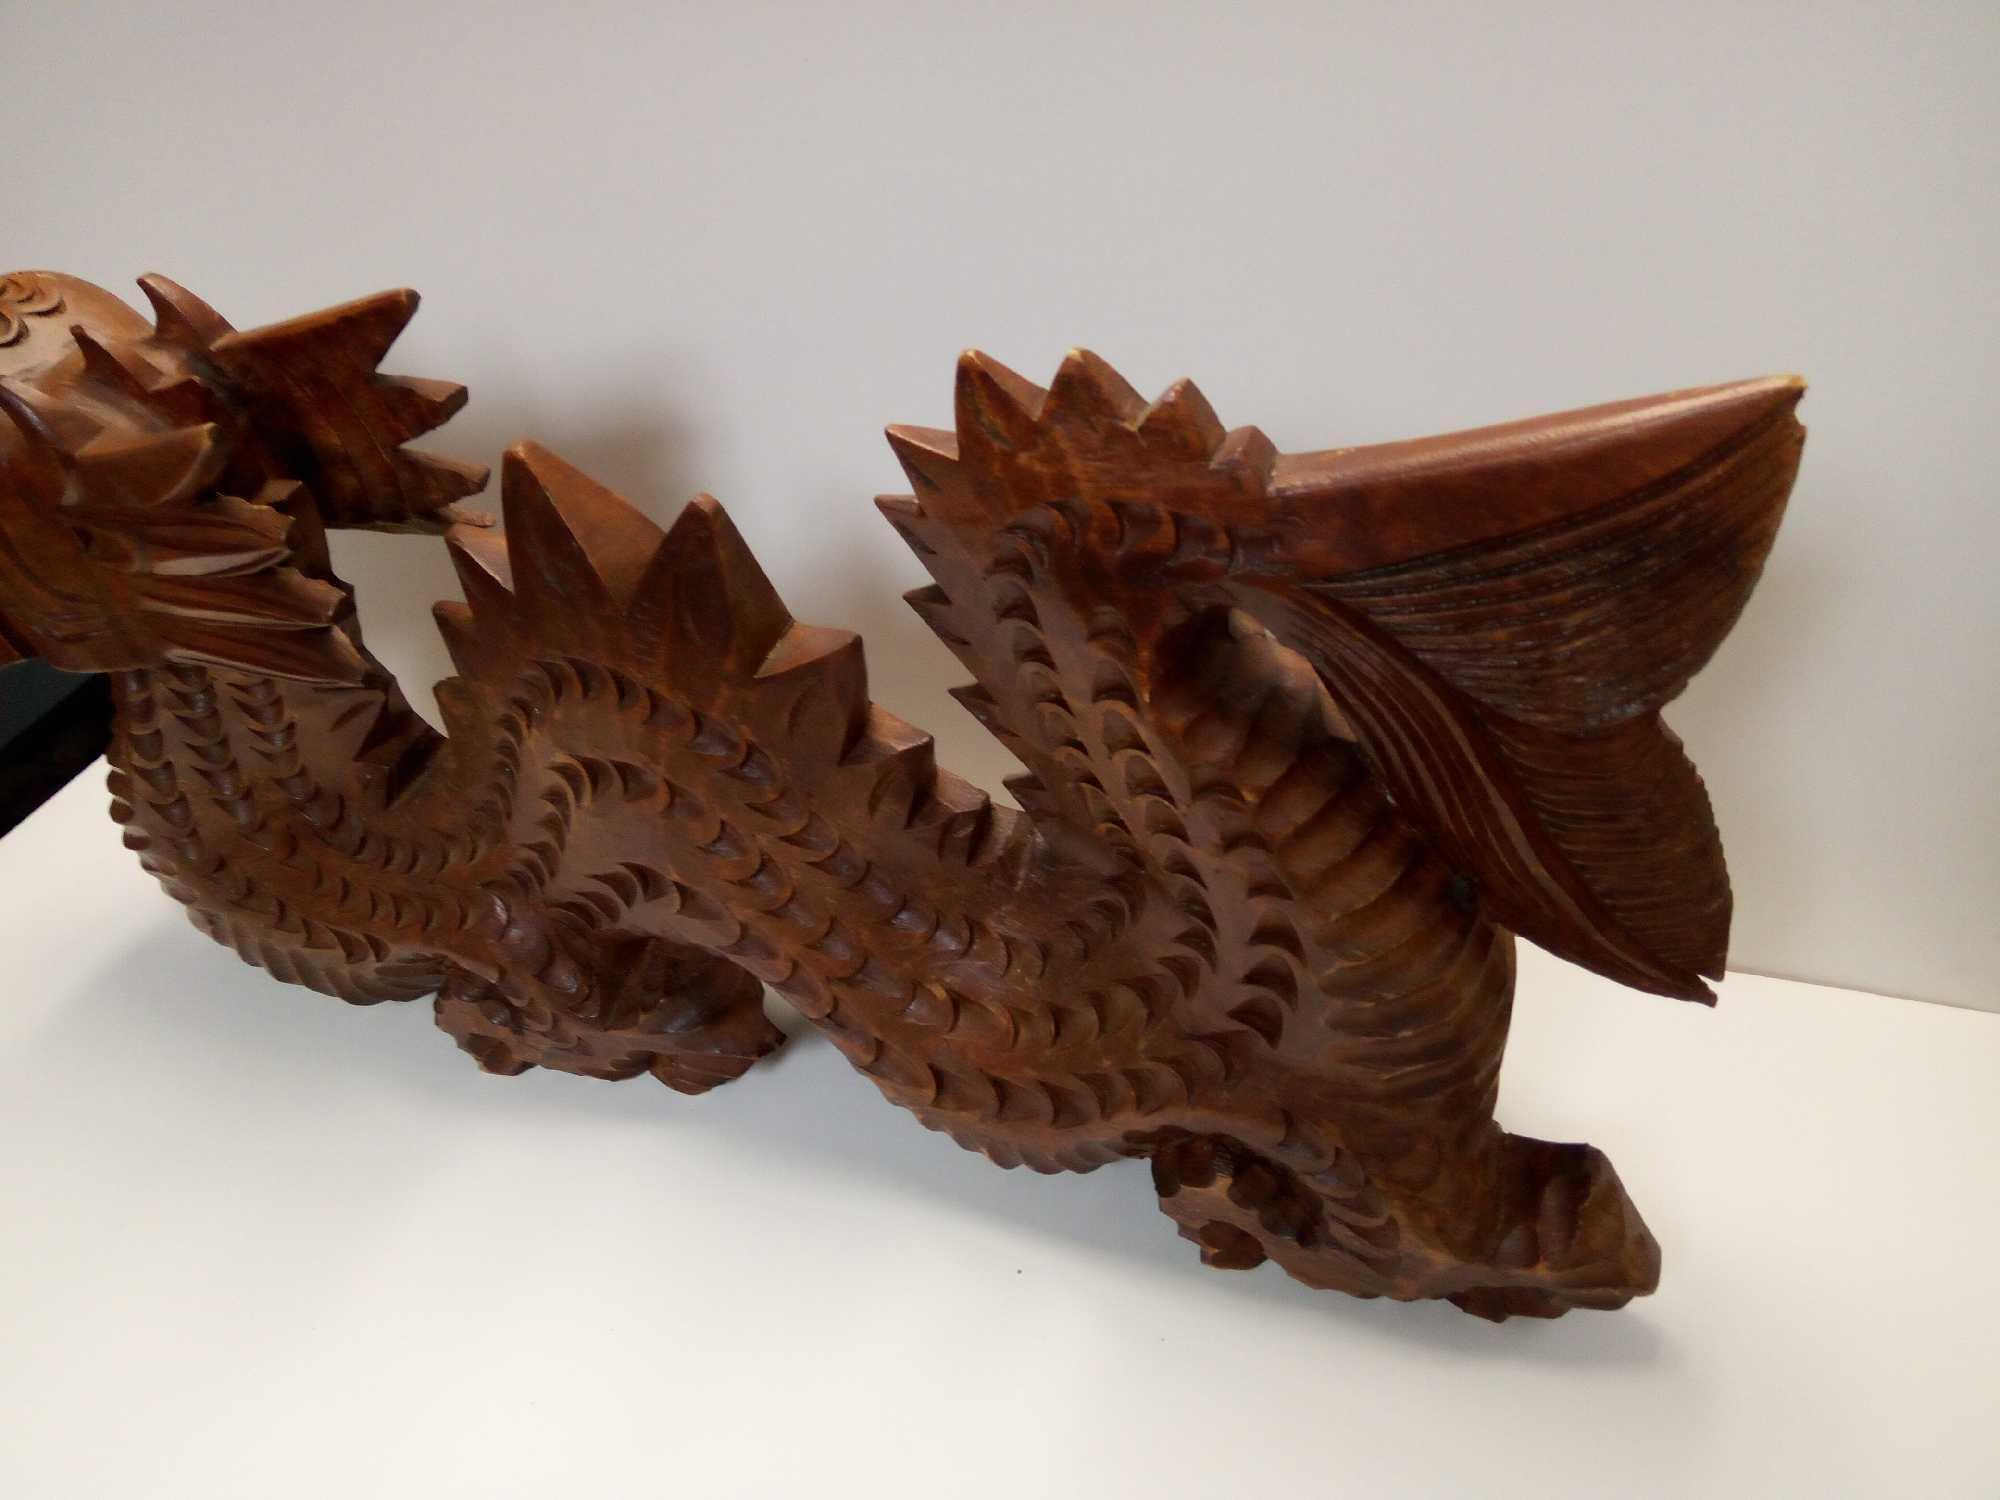 HEAVILY CARVED EAST ASIAN ASTHETIC WOODEN DRAGON